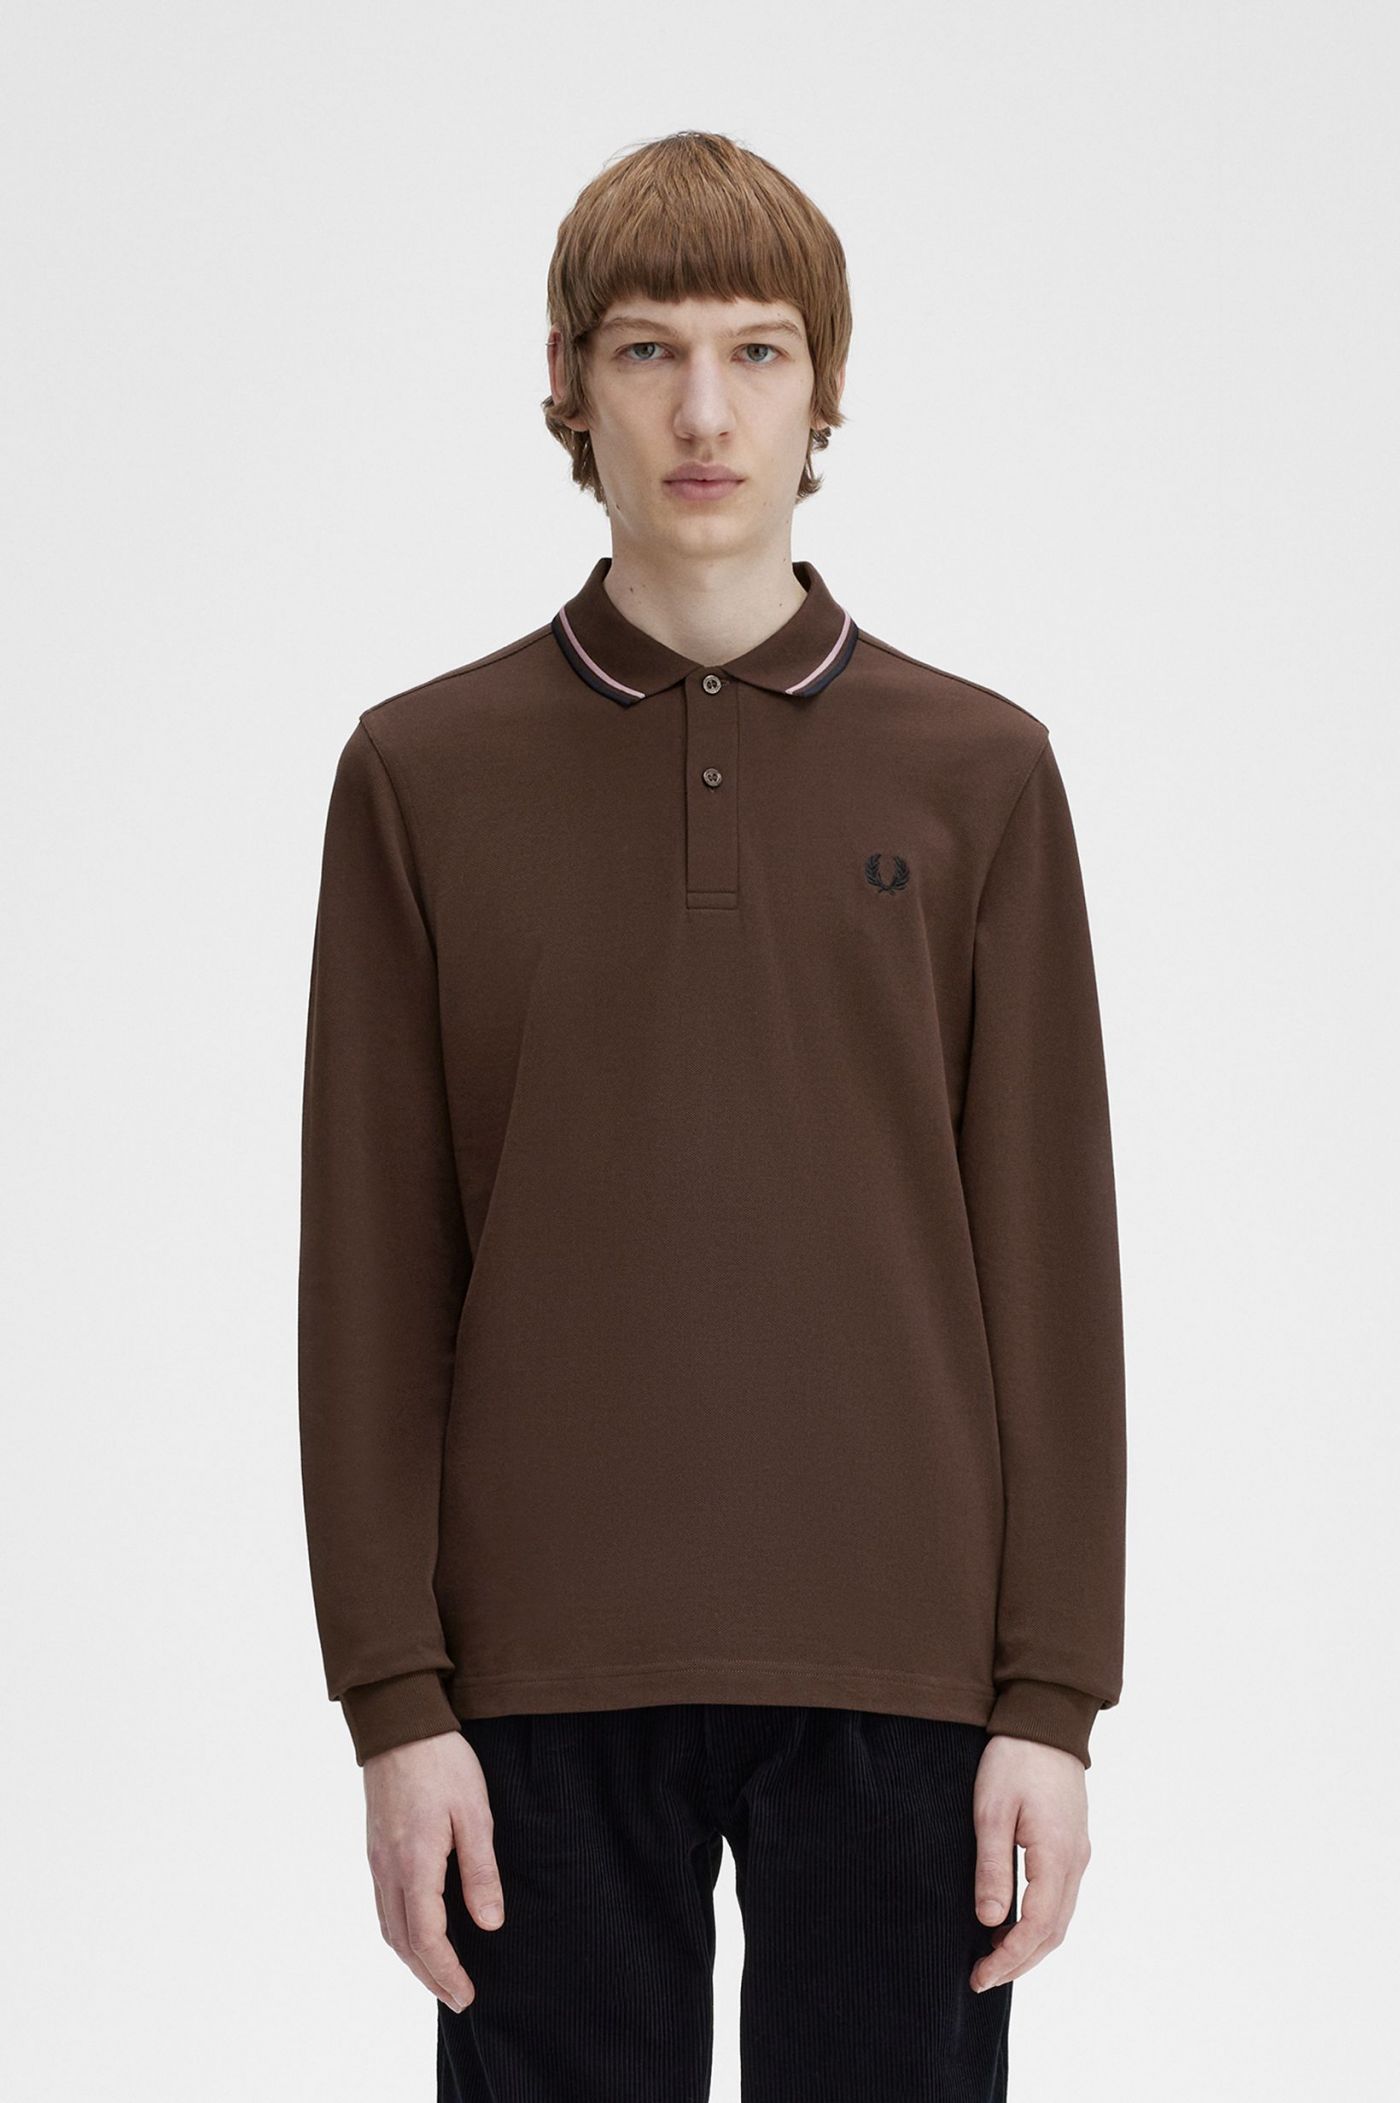 M3636 - Burnt Tobacco / Dark Pink / Black | The Fred Perry Shirt